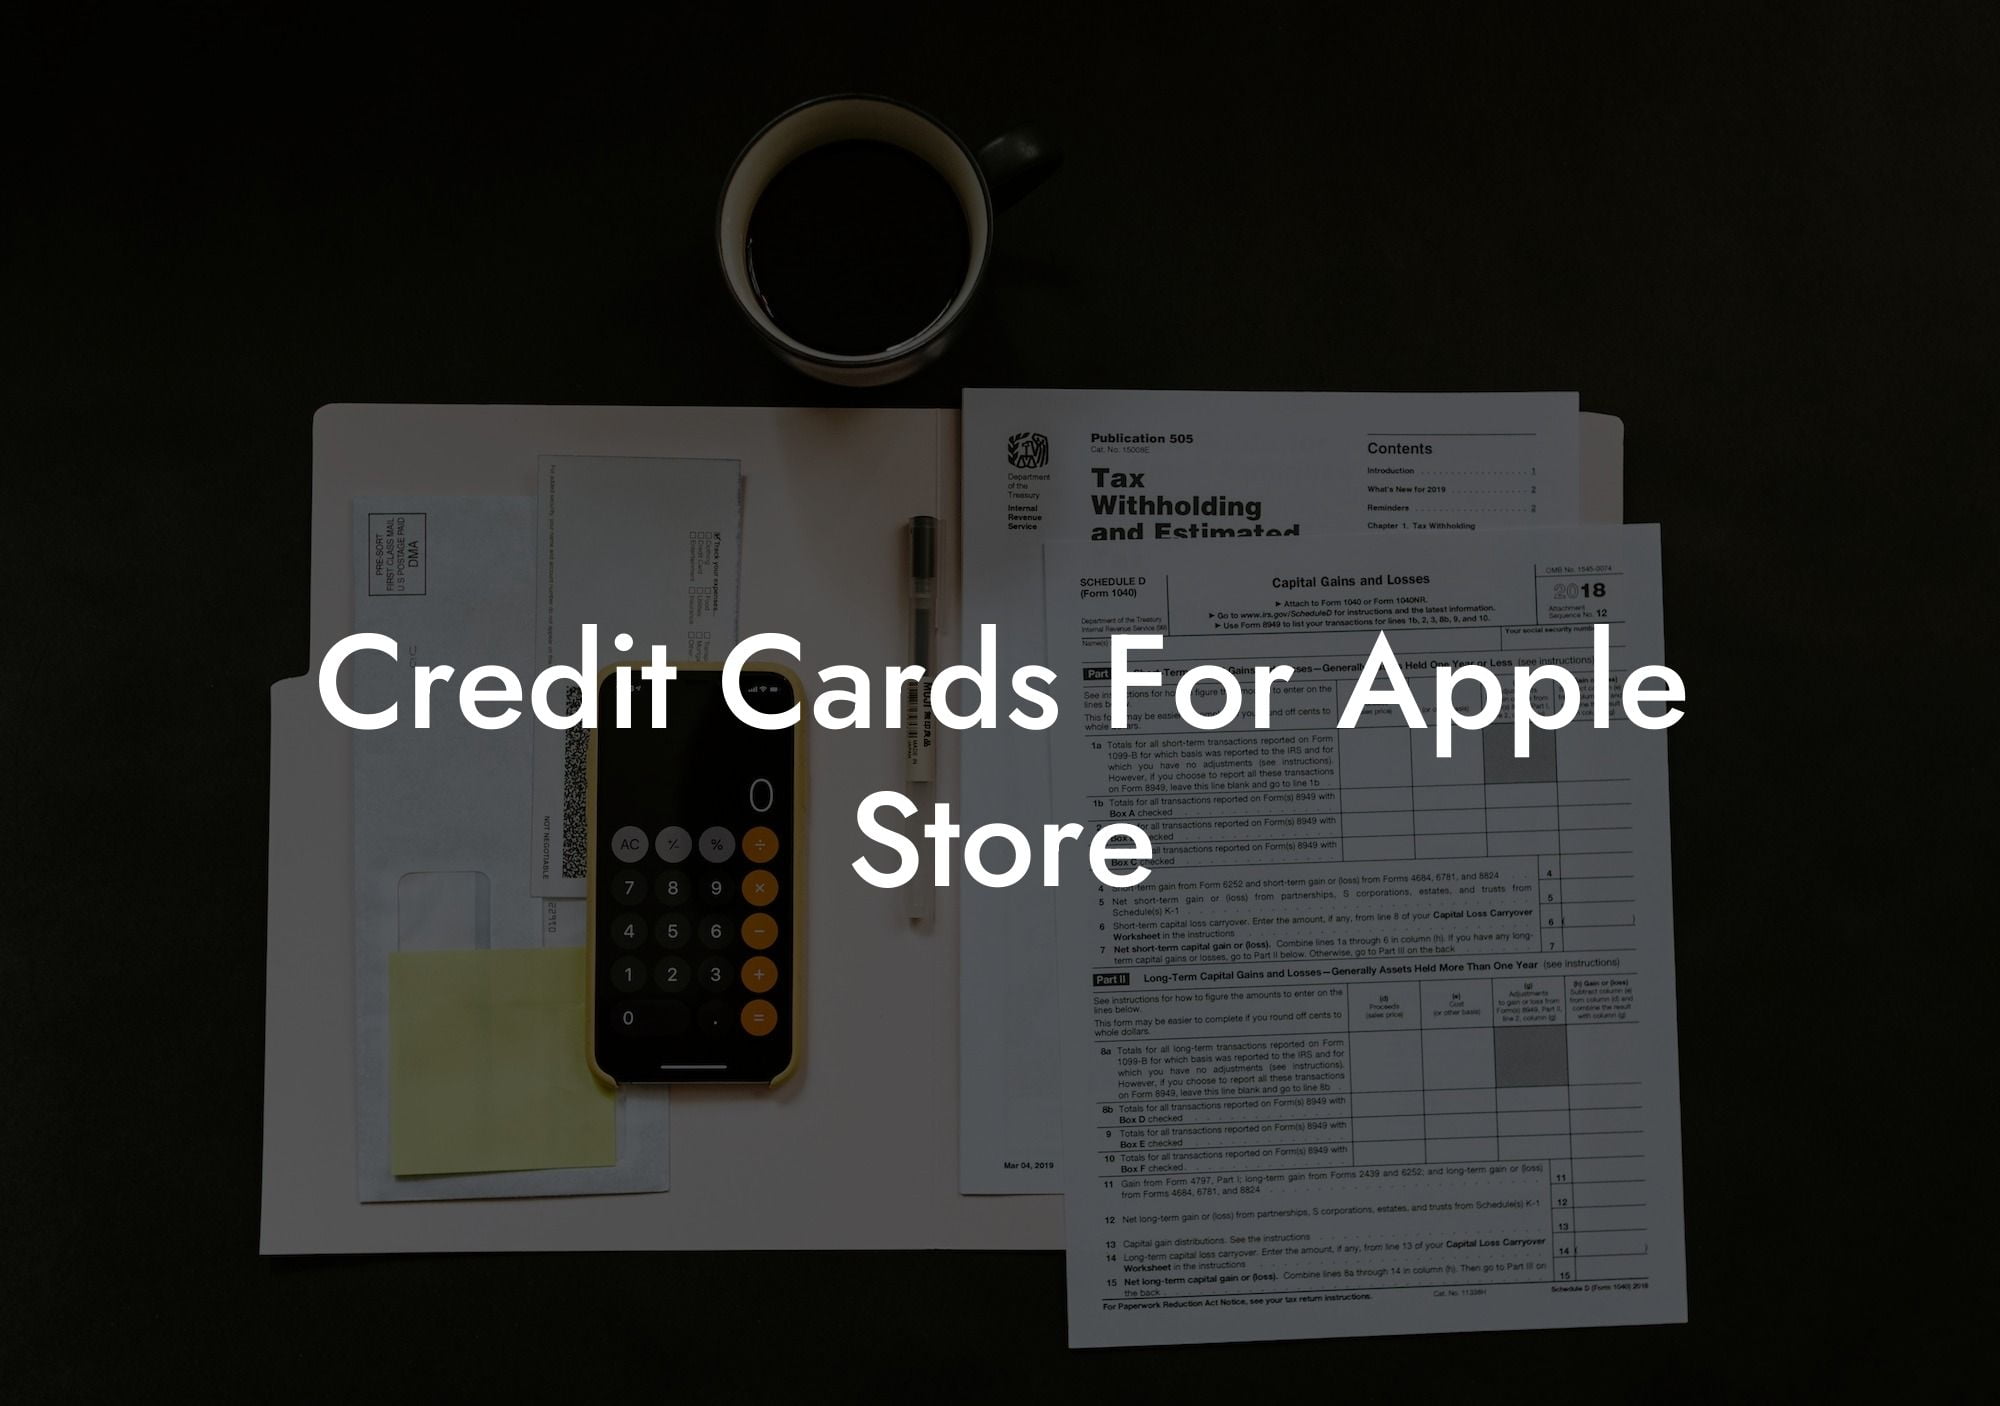 Credit Cards For Apple Store